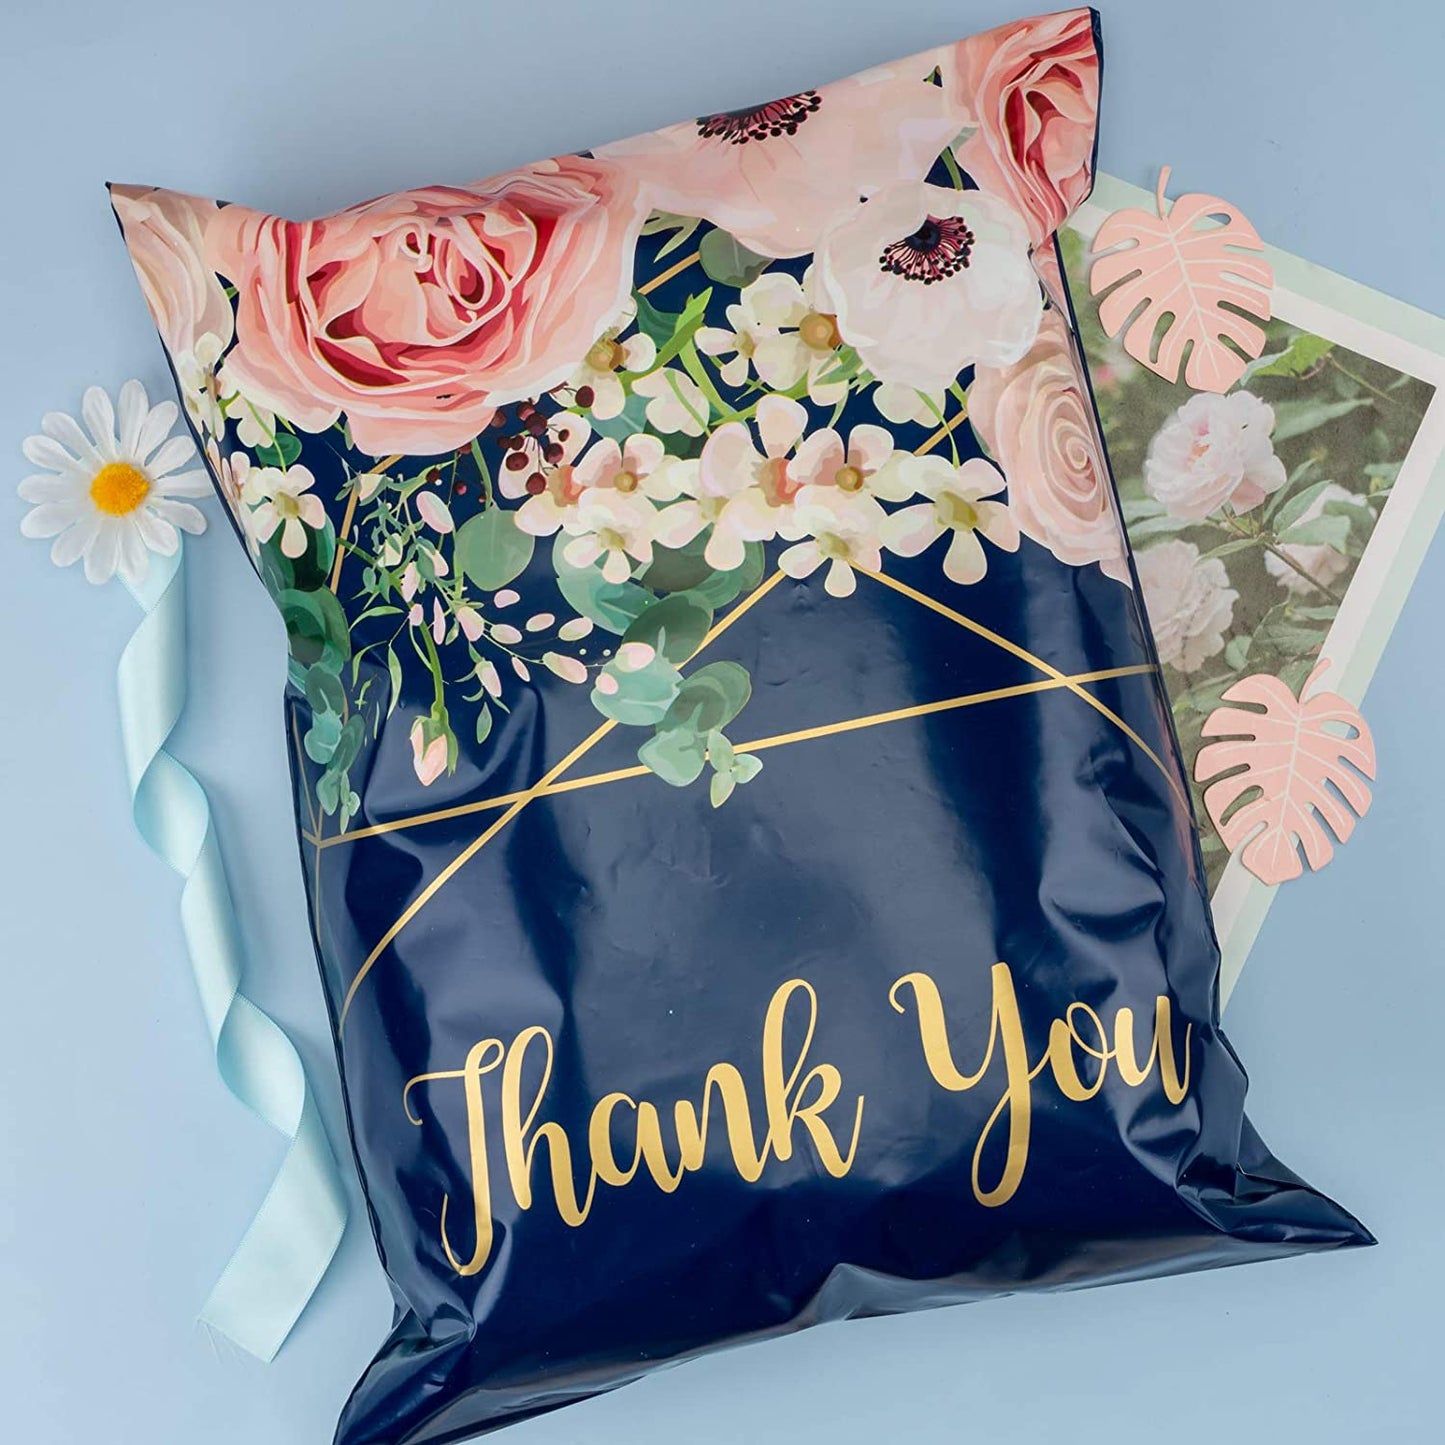 WRAPLA 30 x 40cm (12 x 15.5 inches) Poly Mailers Shipping Bags Thank You Notes Flowers Surrounded Navy Blue Poly Mailers 3 Mil Heavy Duty Self Seal Mailing Envelopes - 50 Pack